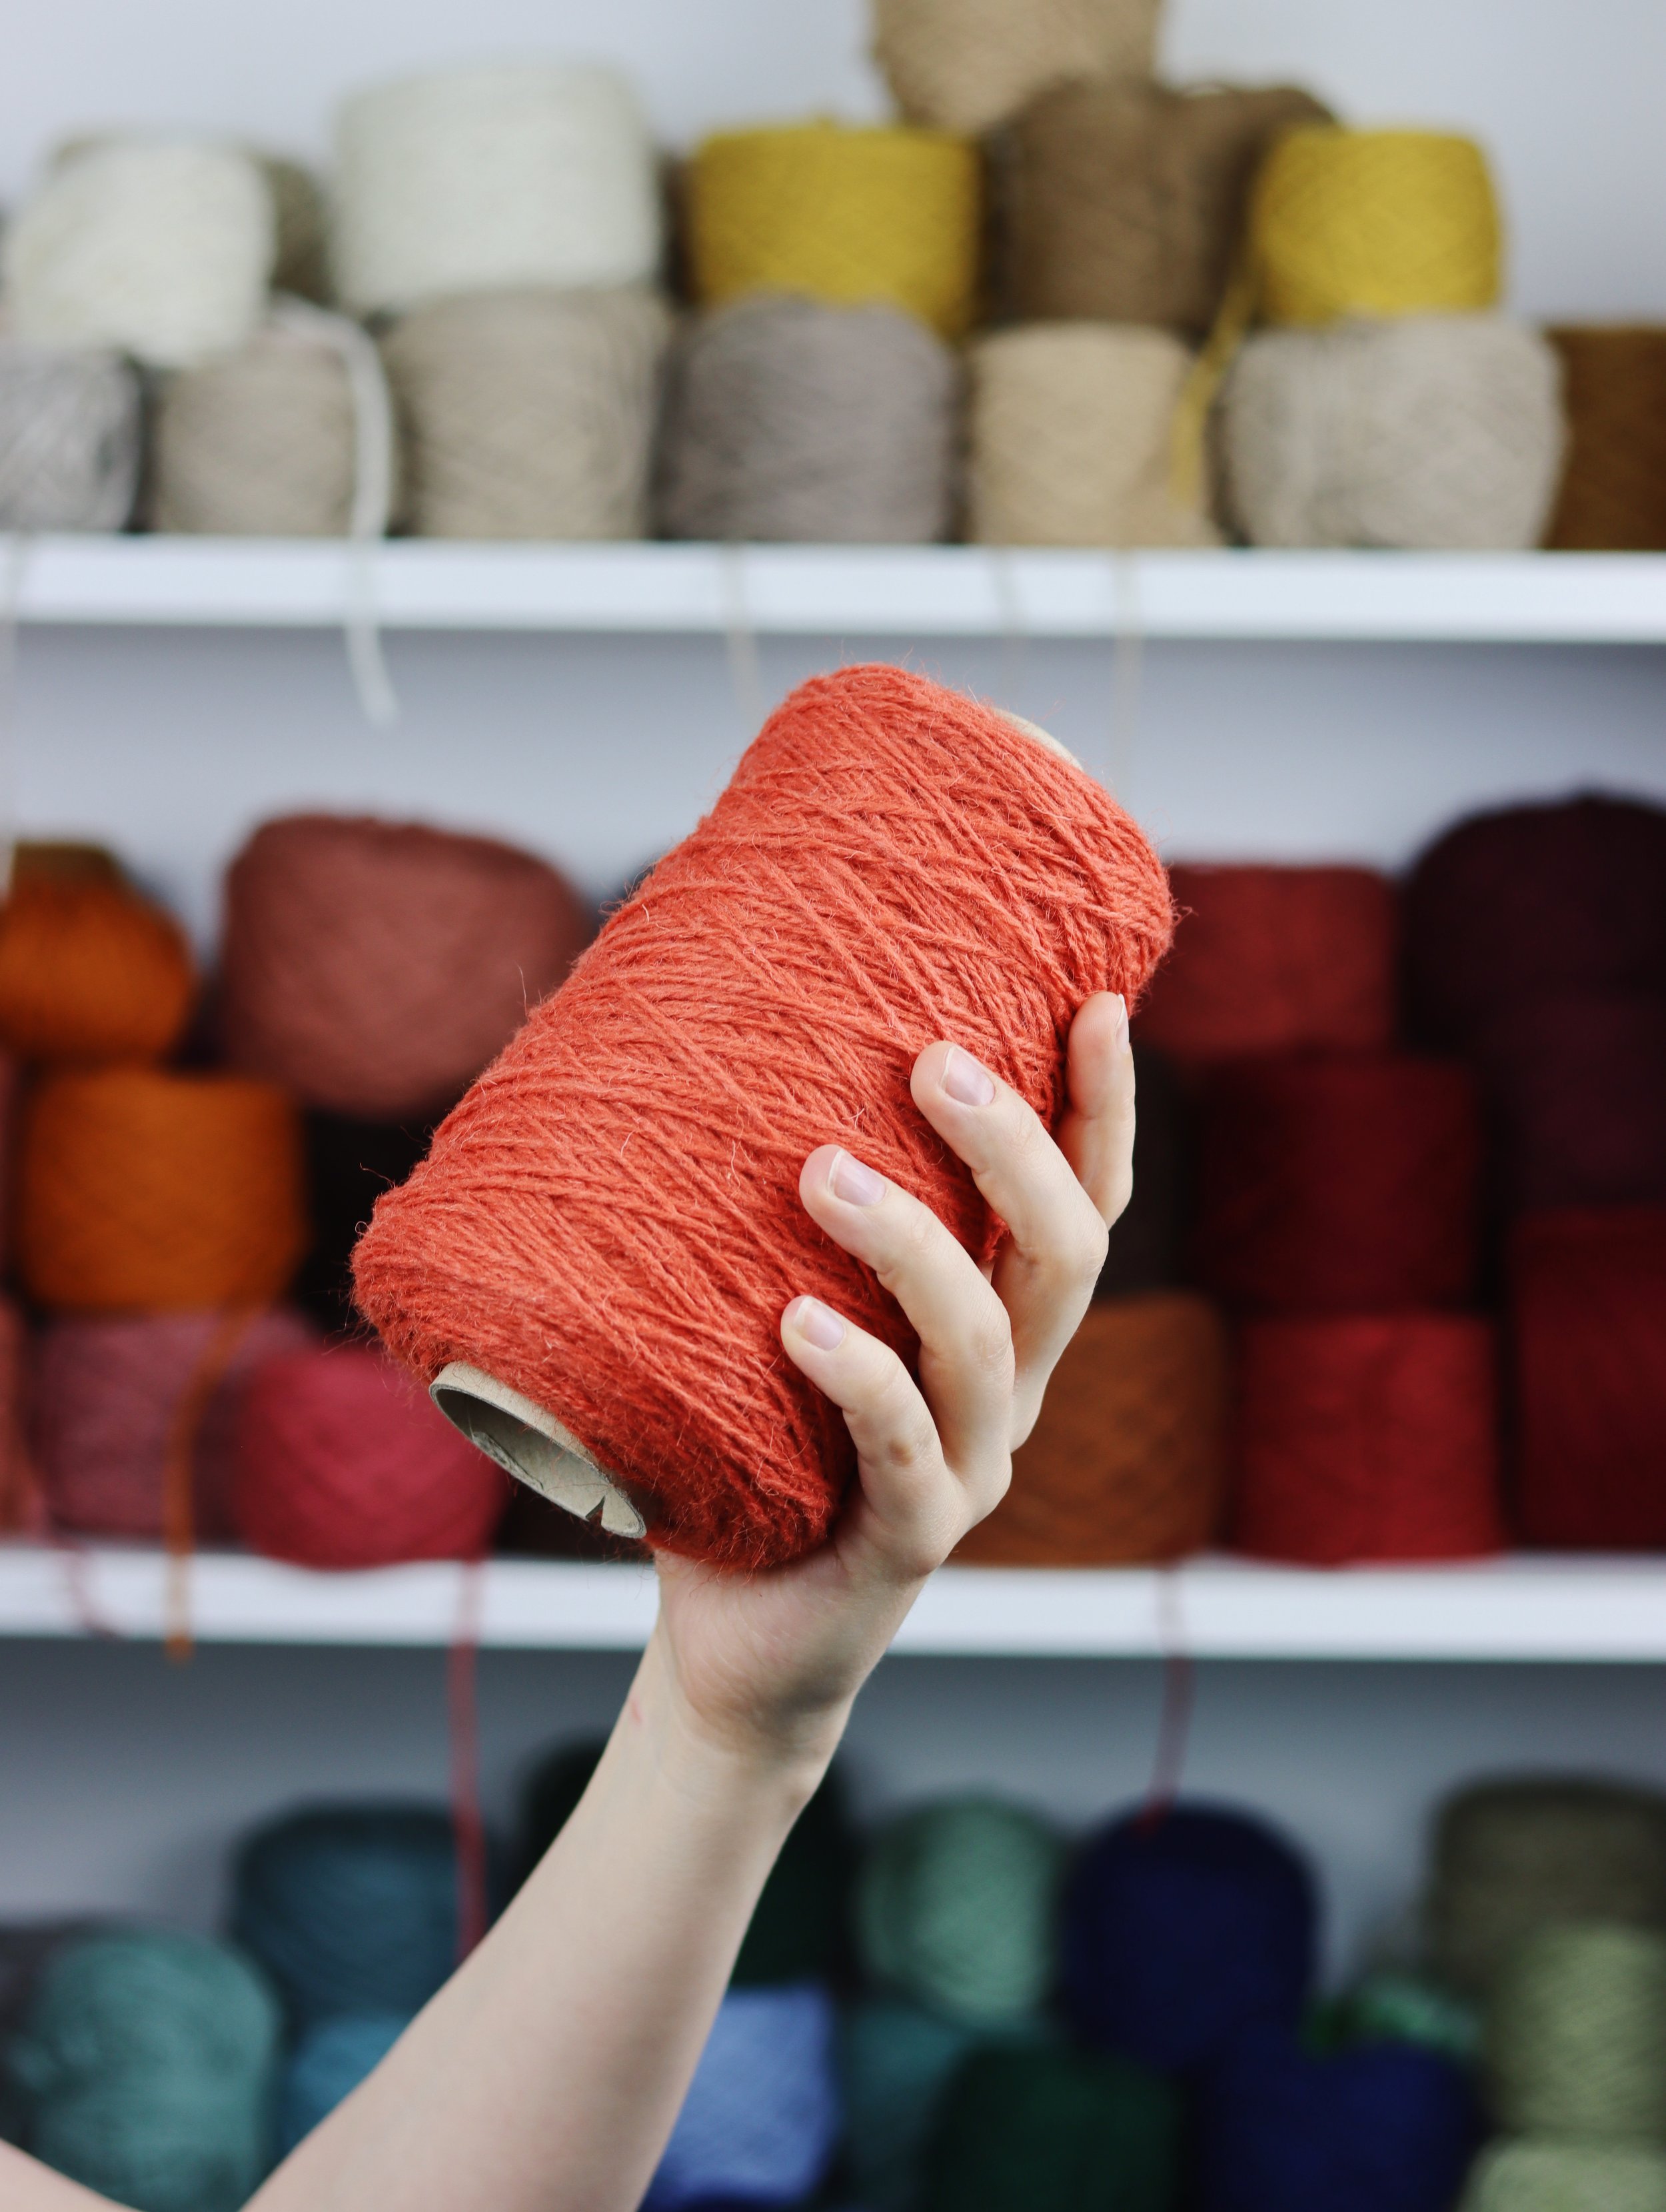 A Weaver's Guide to Thrifting Yarn — Balfour & Co Weaving Supplies